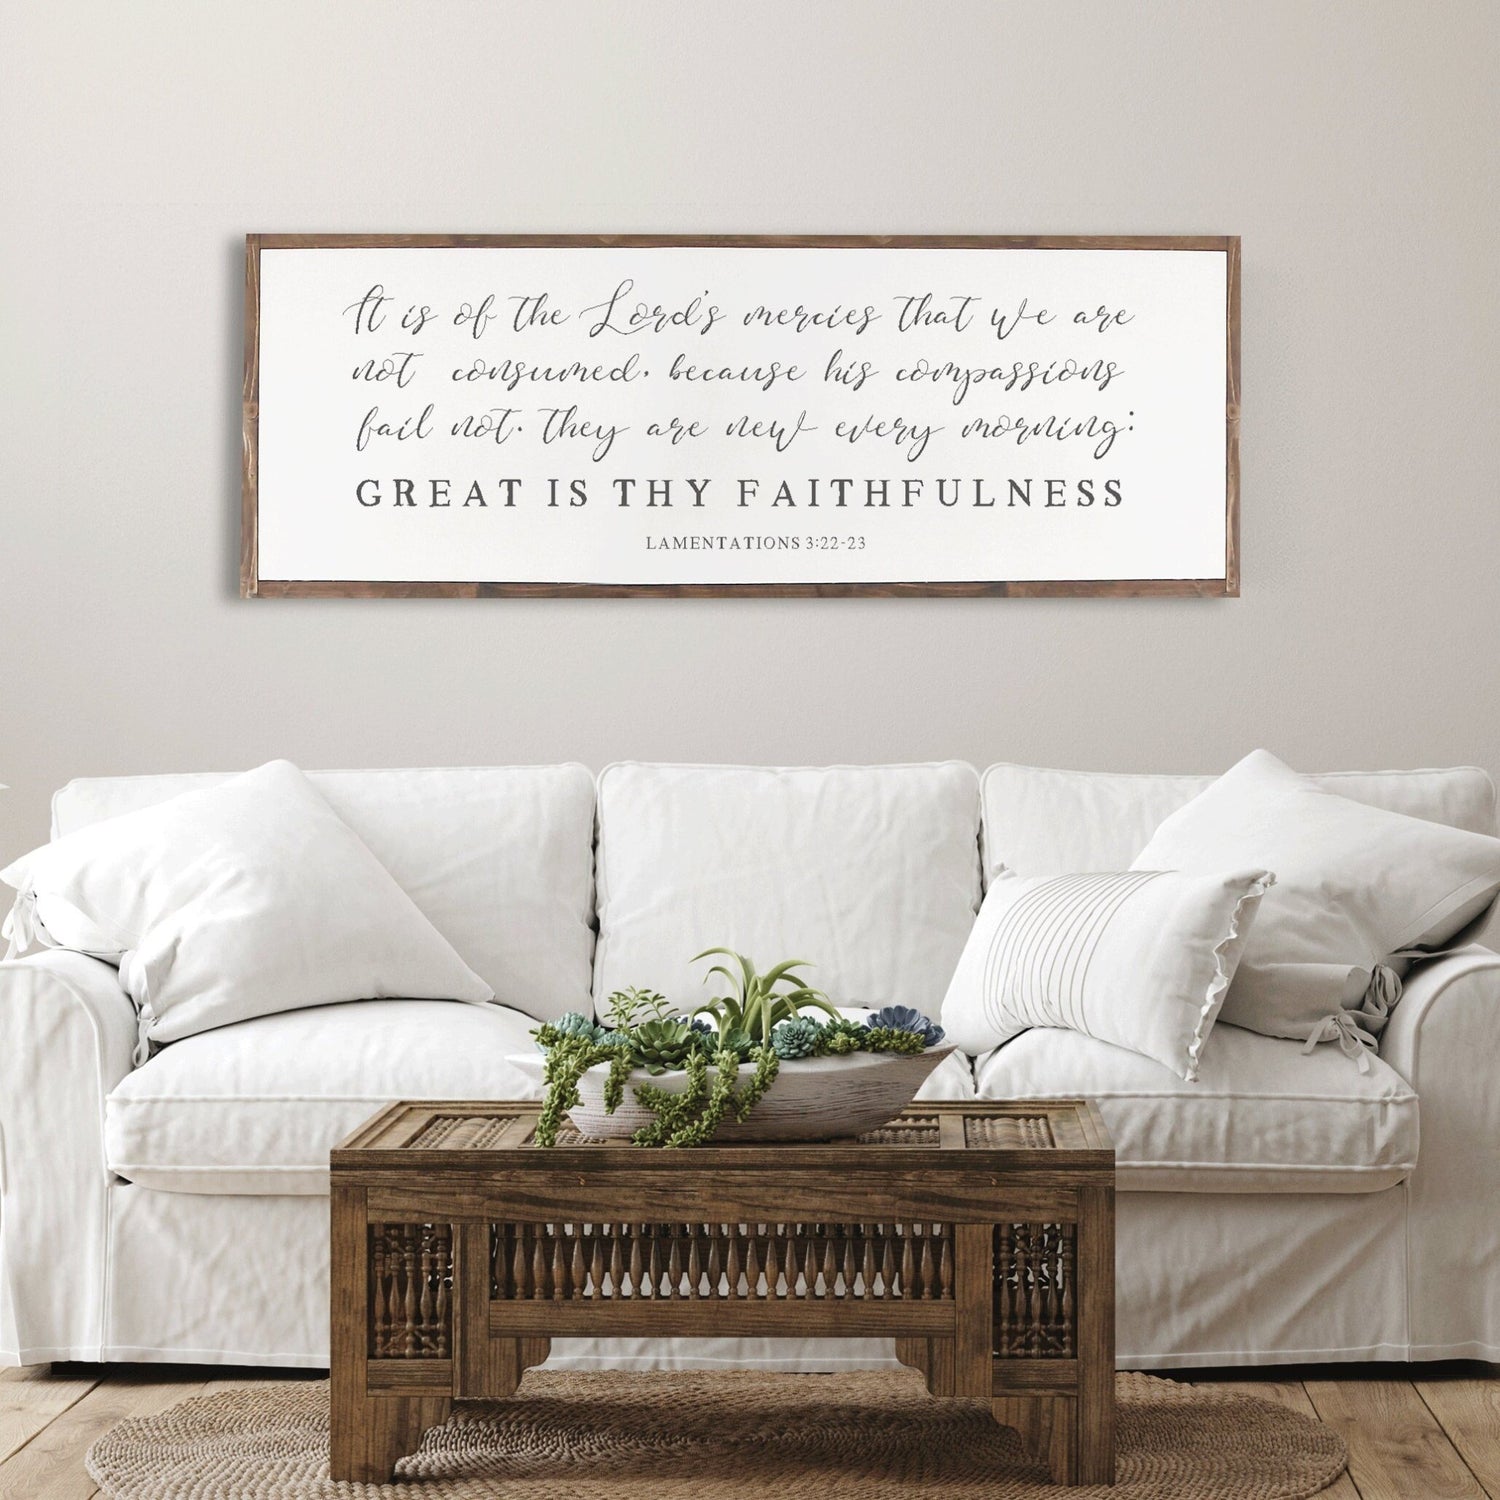 Great Is Thy Faithfulness Wood Sign, Hand Painted, Rustic Wood Sign BEDROOM SIGN - Lamentations 3:22-23 - Forever Written